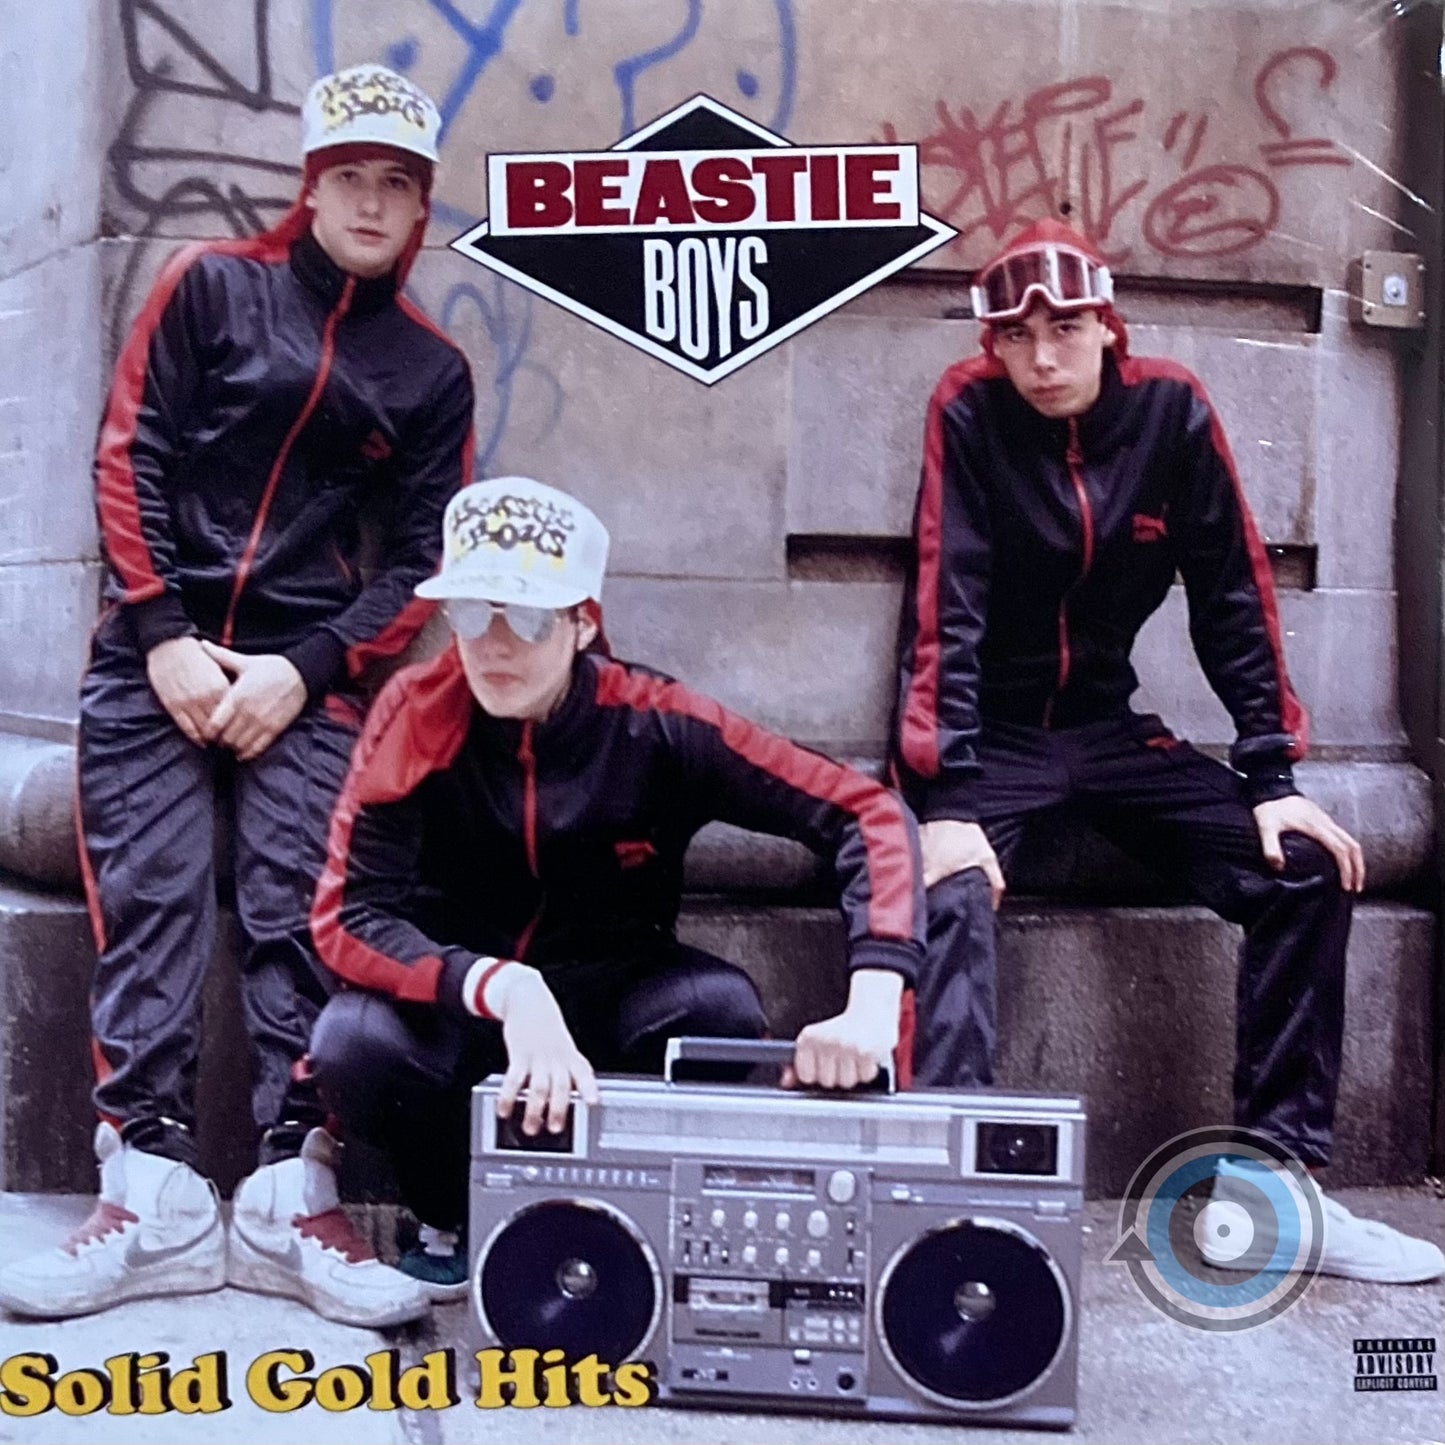 Beastie Boys - Solid Gold Hits 2-LP (Sealed)